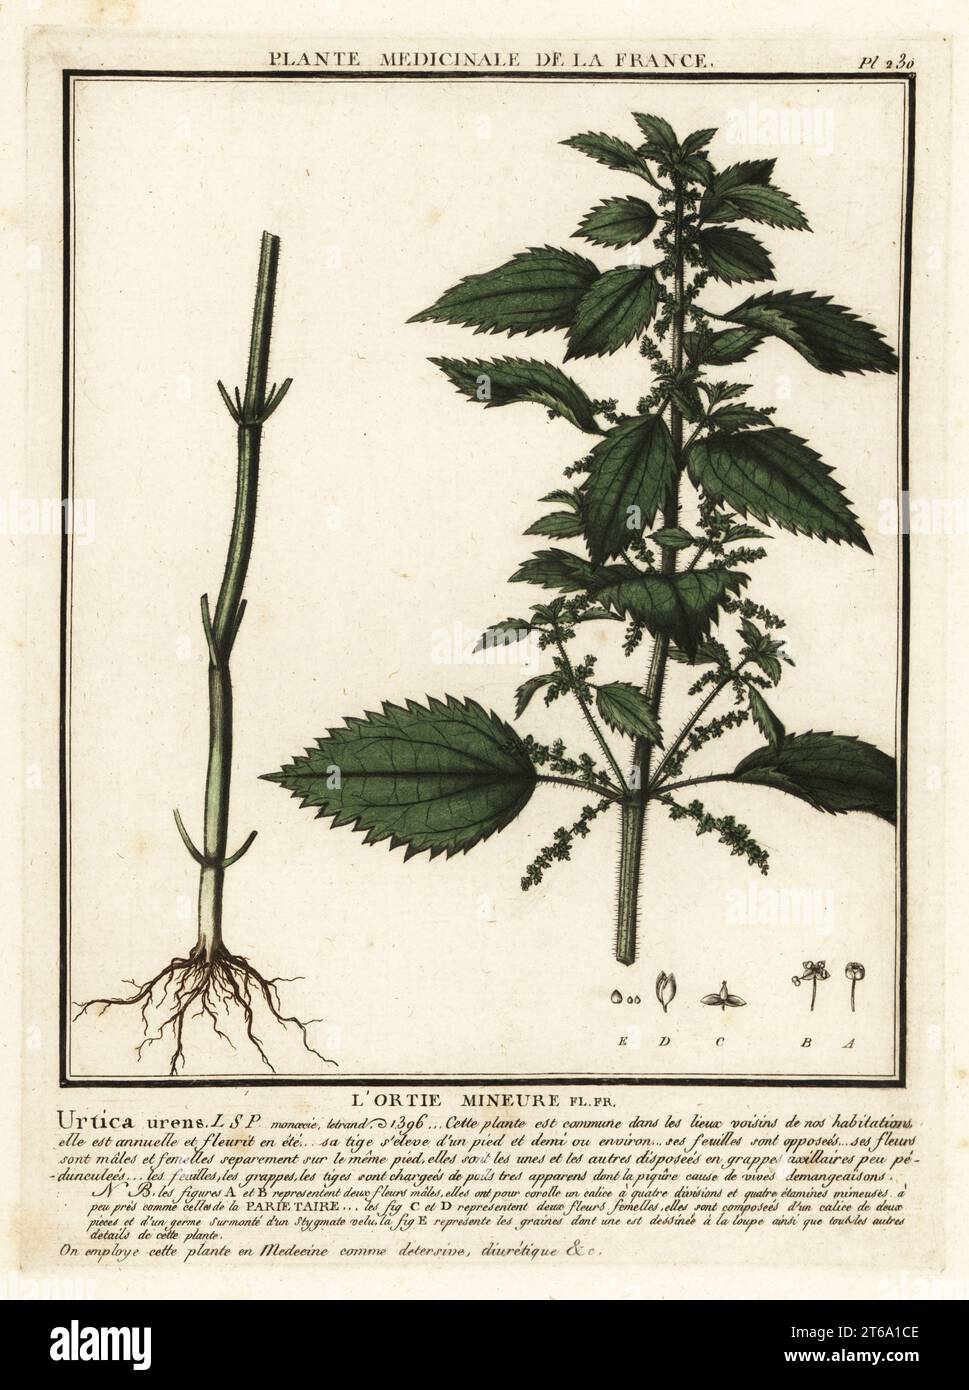 Annual nettle, lortie mineure, Urtica urens. Copperplate engraving printed in three colours by Pierre Bulliard from his Herbier de la France, ou collection complete des plantes indigenes de ce royaume, Didot jeune, Debure et Belin, 1780-1793. Stock Photo